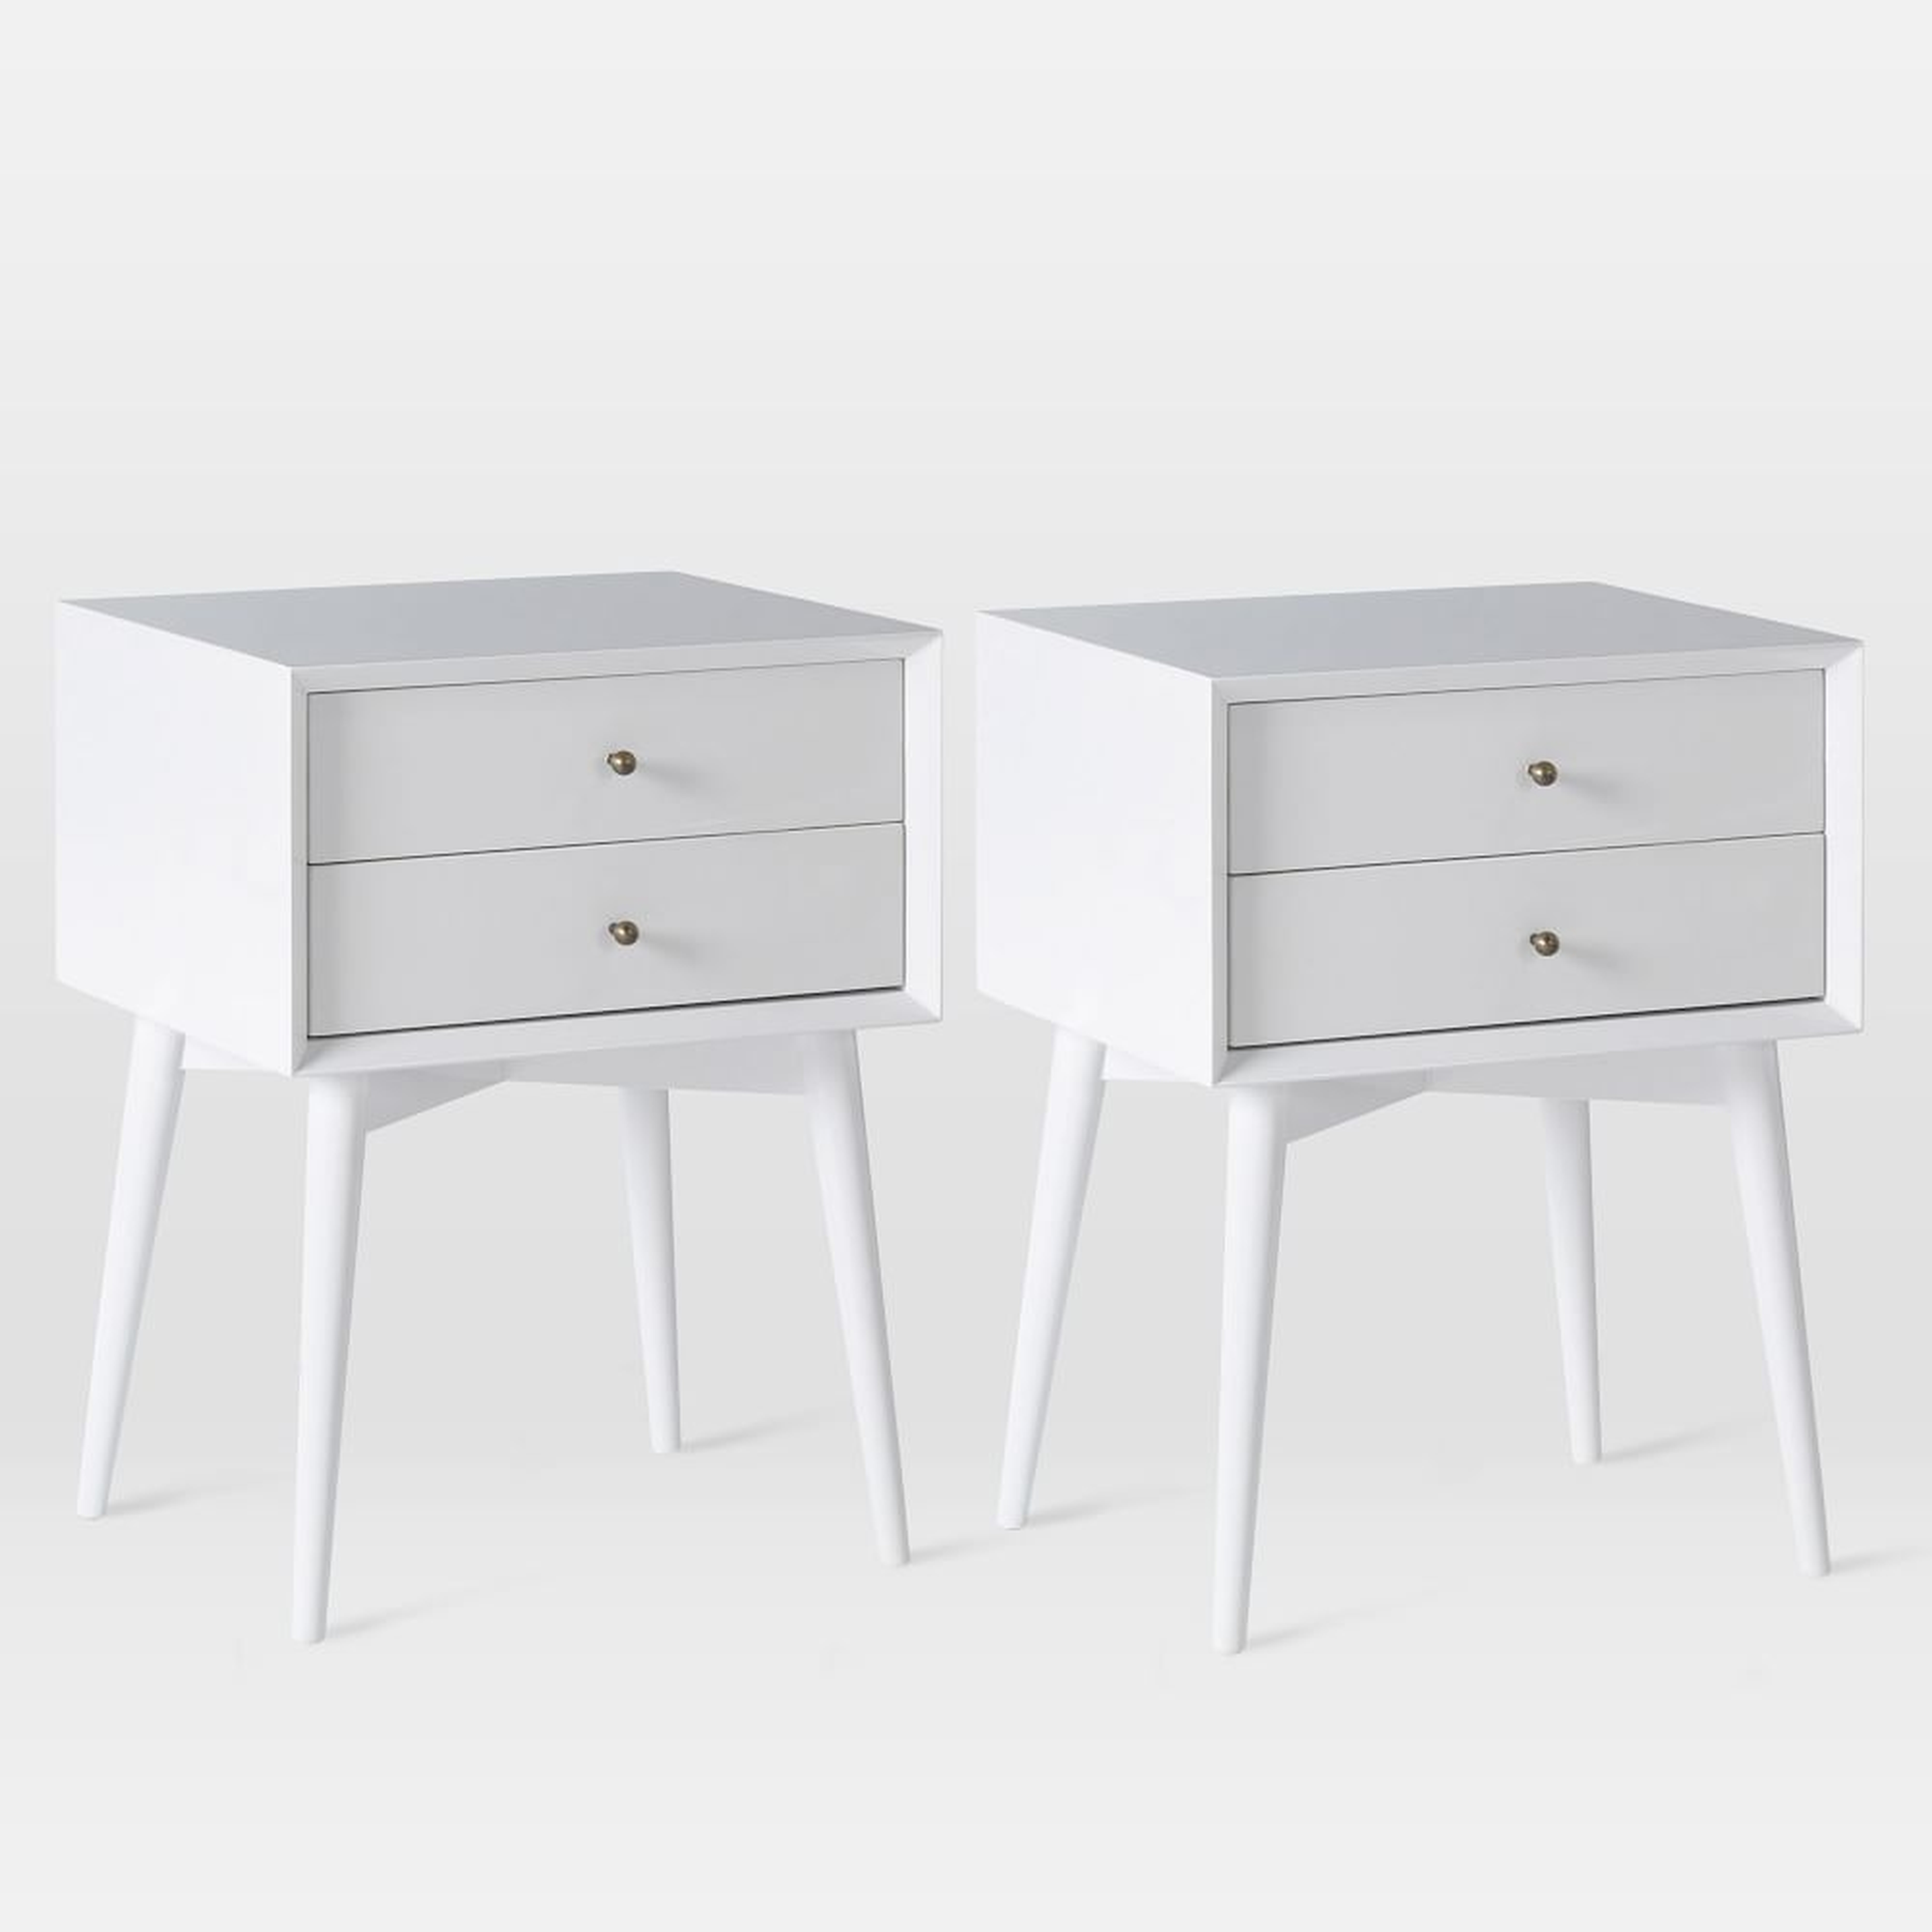 Mid-Century (17.5") Nightstand, White Lacquer, Set of 2 - West Elm